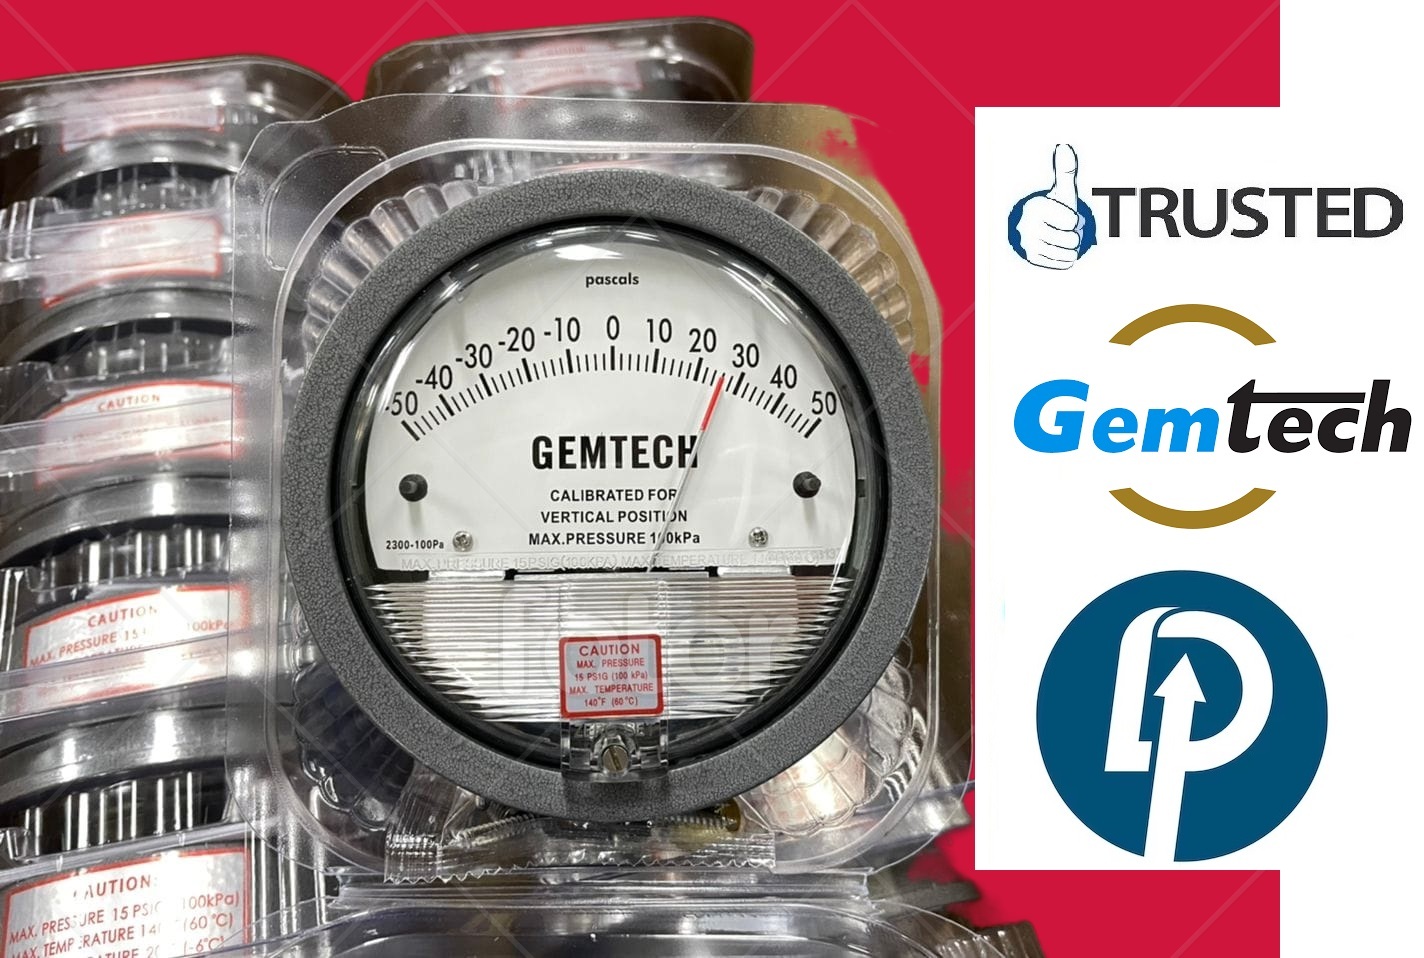 Model G2000-500 Pa Gemtech Differential Pressure Gauges by Range 0 To 500 Pascal